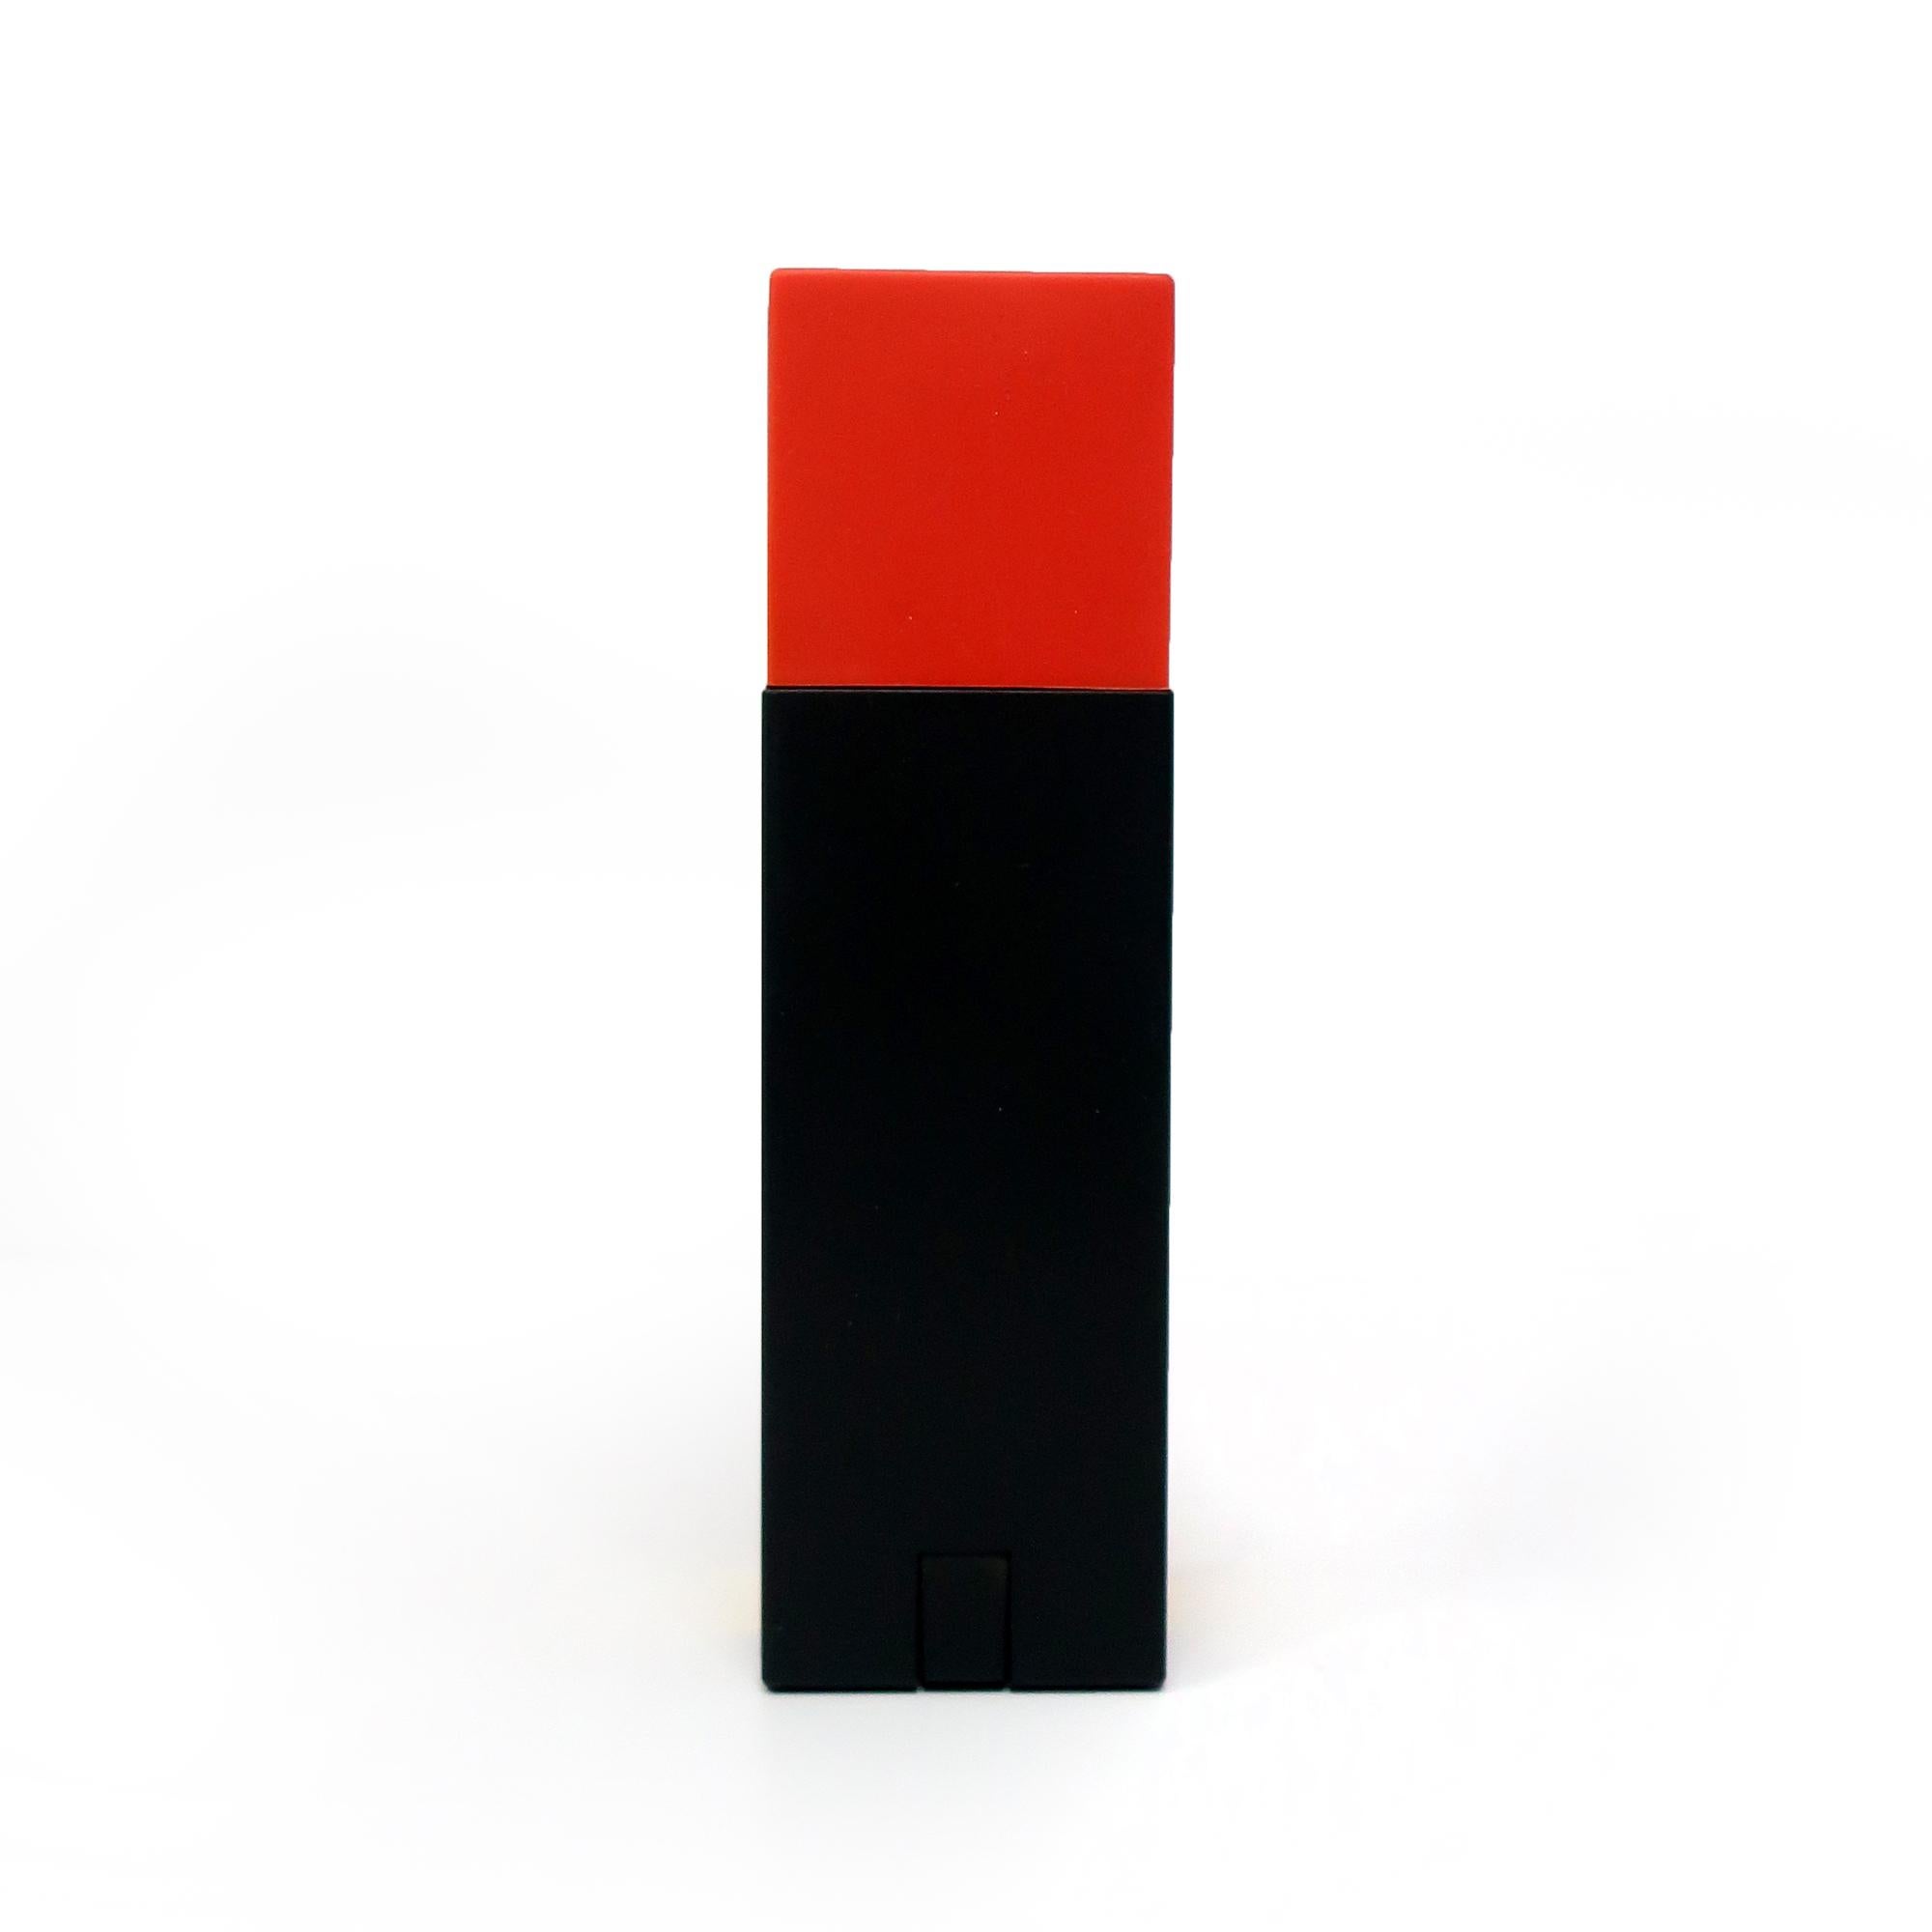 20th Century 1986 Enorme Telephone Handset by Ettore Sottsass For Sale